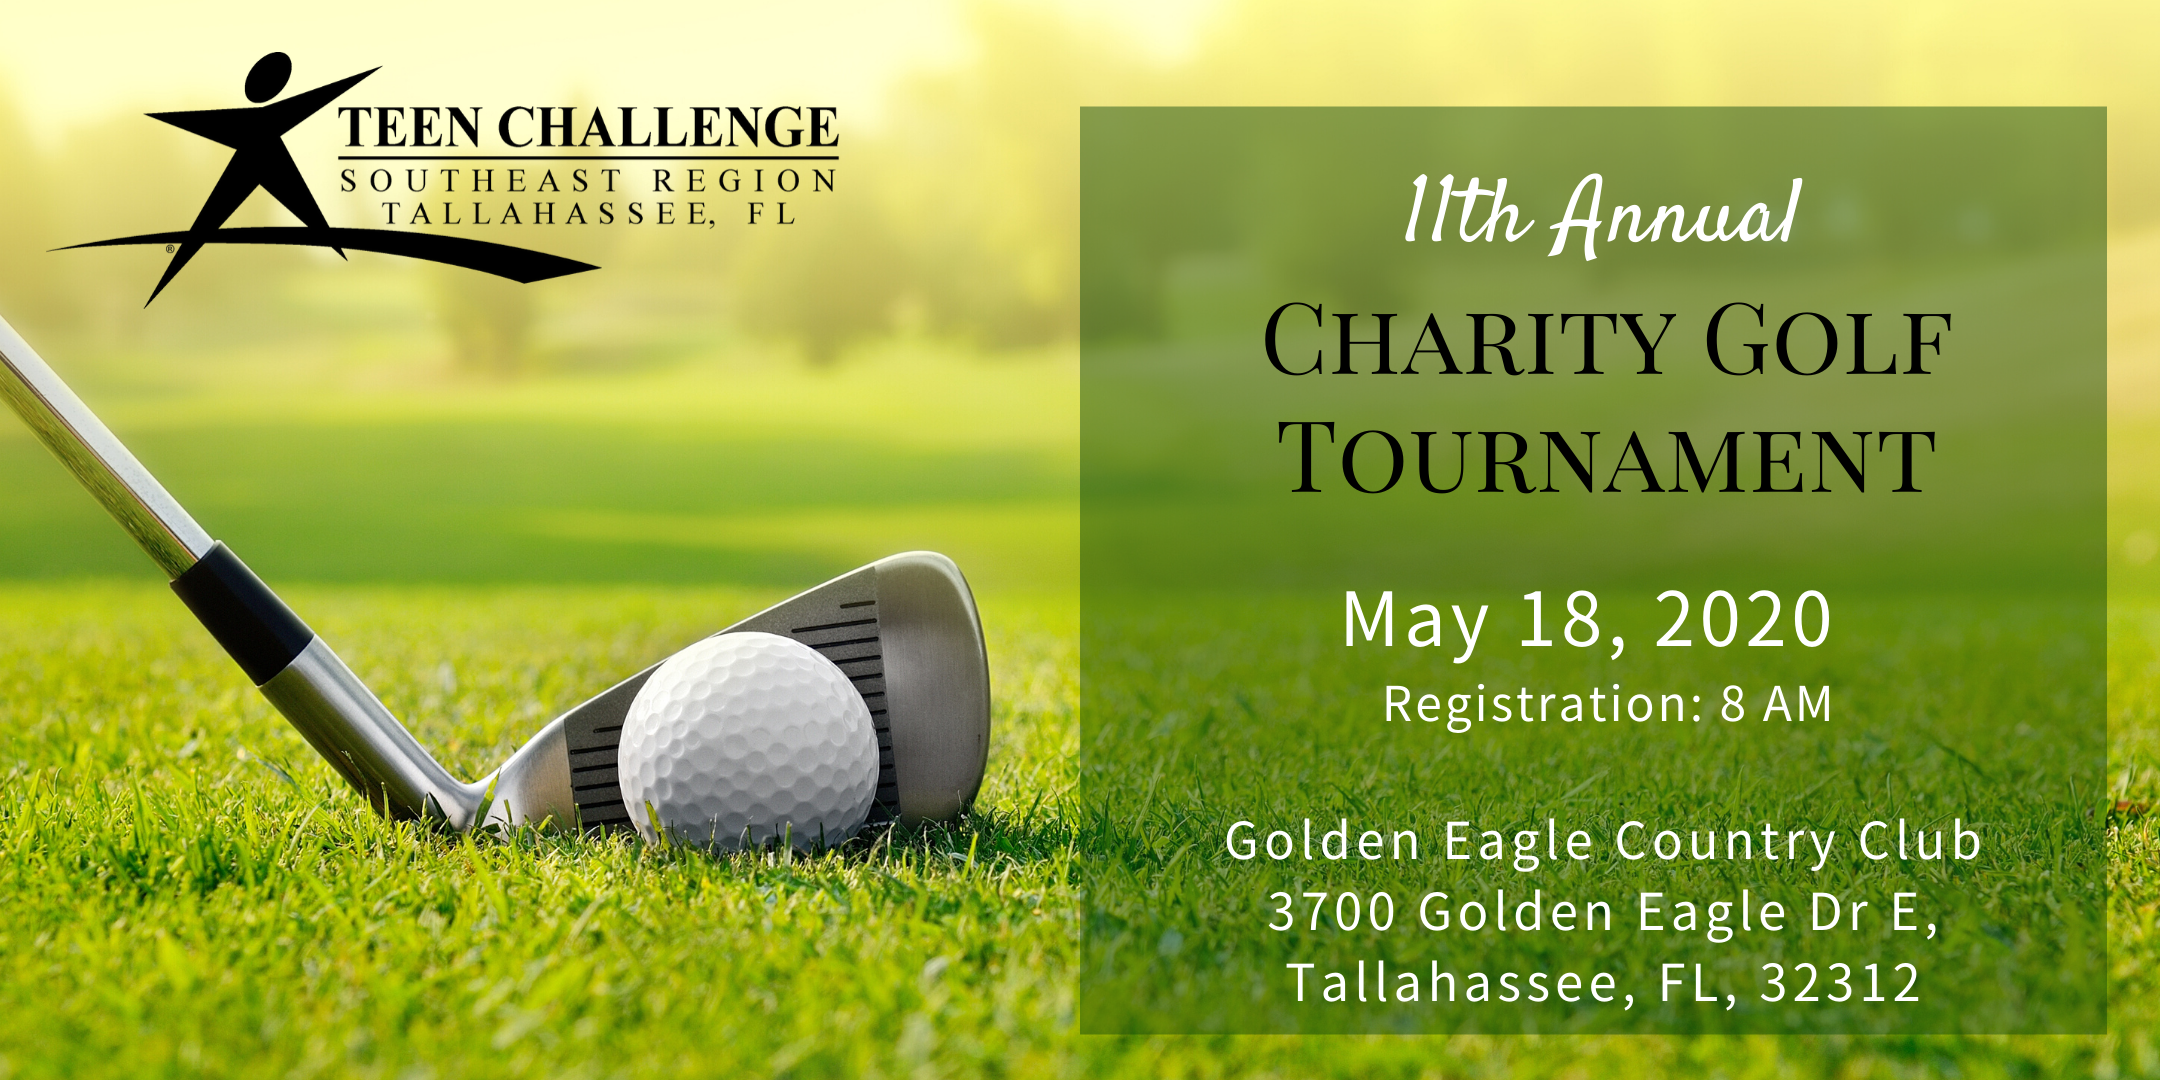 Teen Challenge Tallahassee 11th Annual Charity Golf Tournament